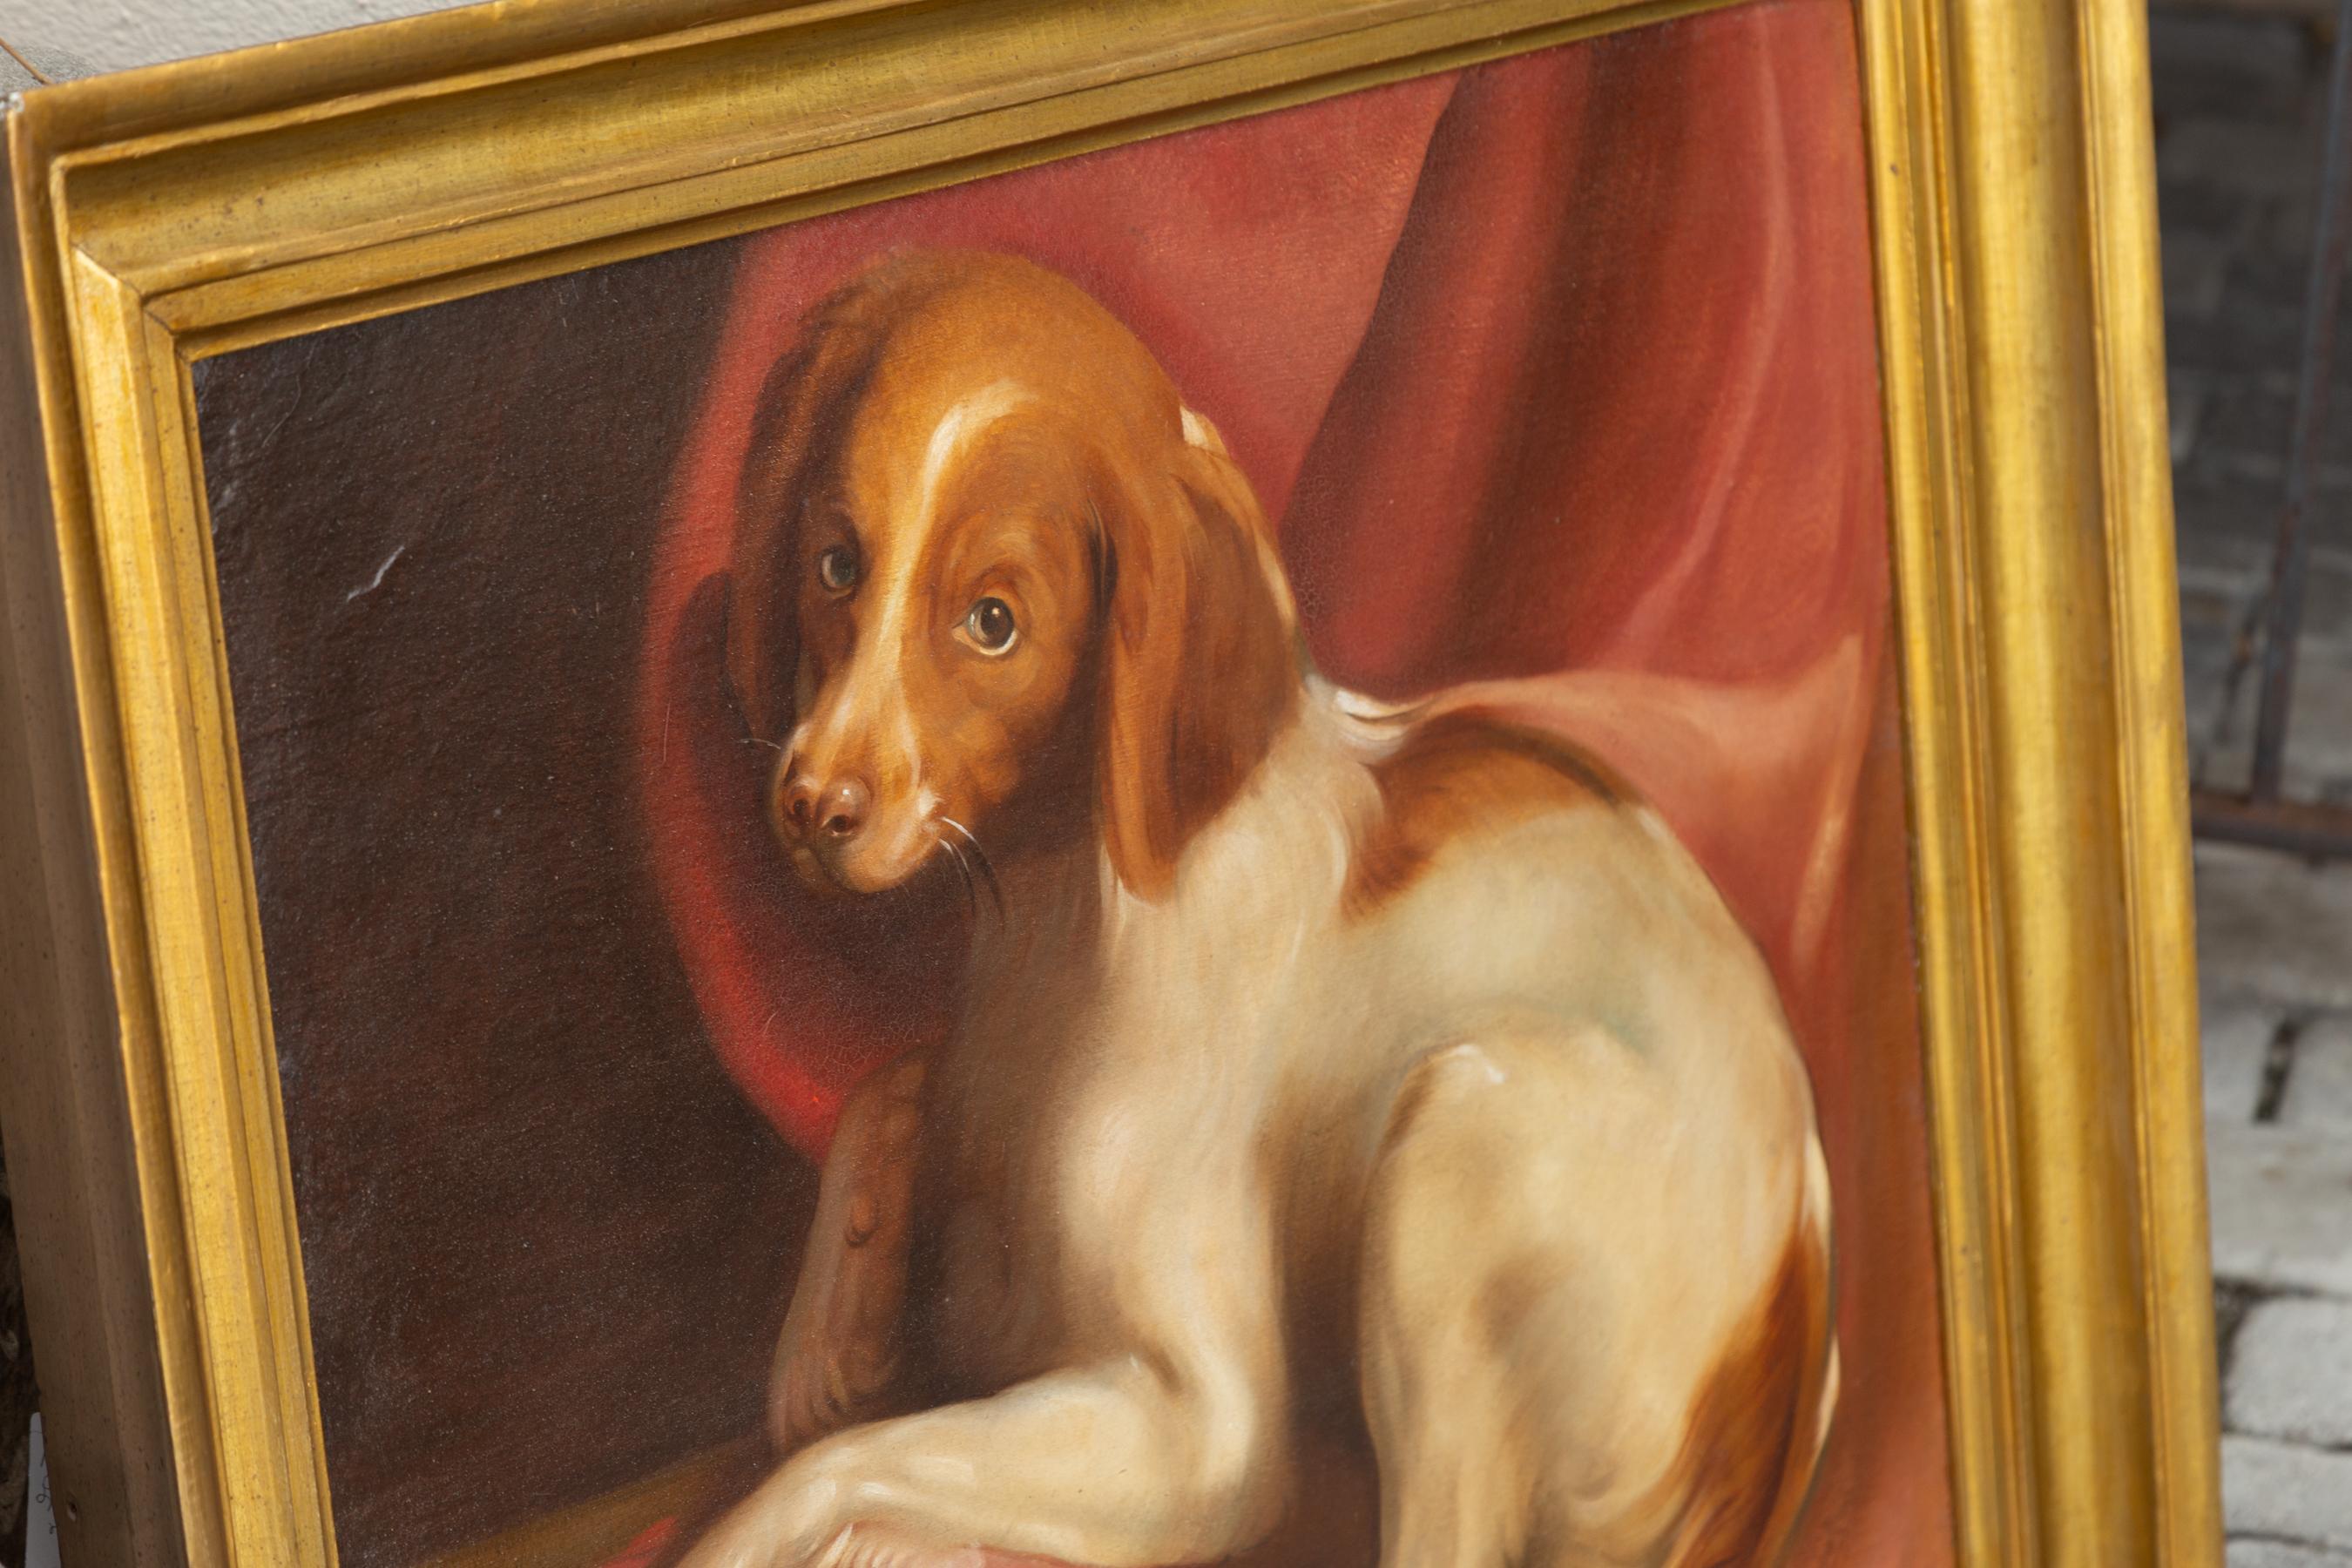 American 1890s Framed Oil on Board Painting Depicting a Dog Lying on a Red Drape For Sale 5